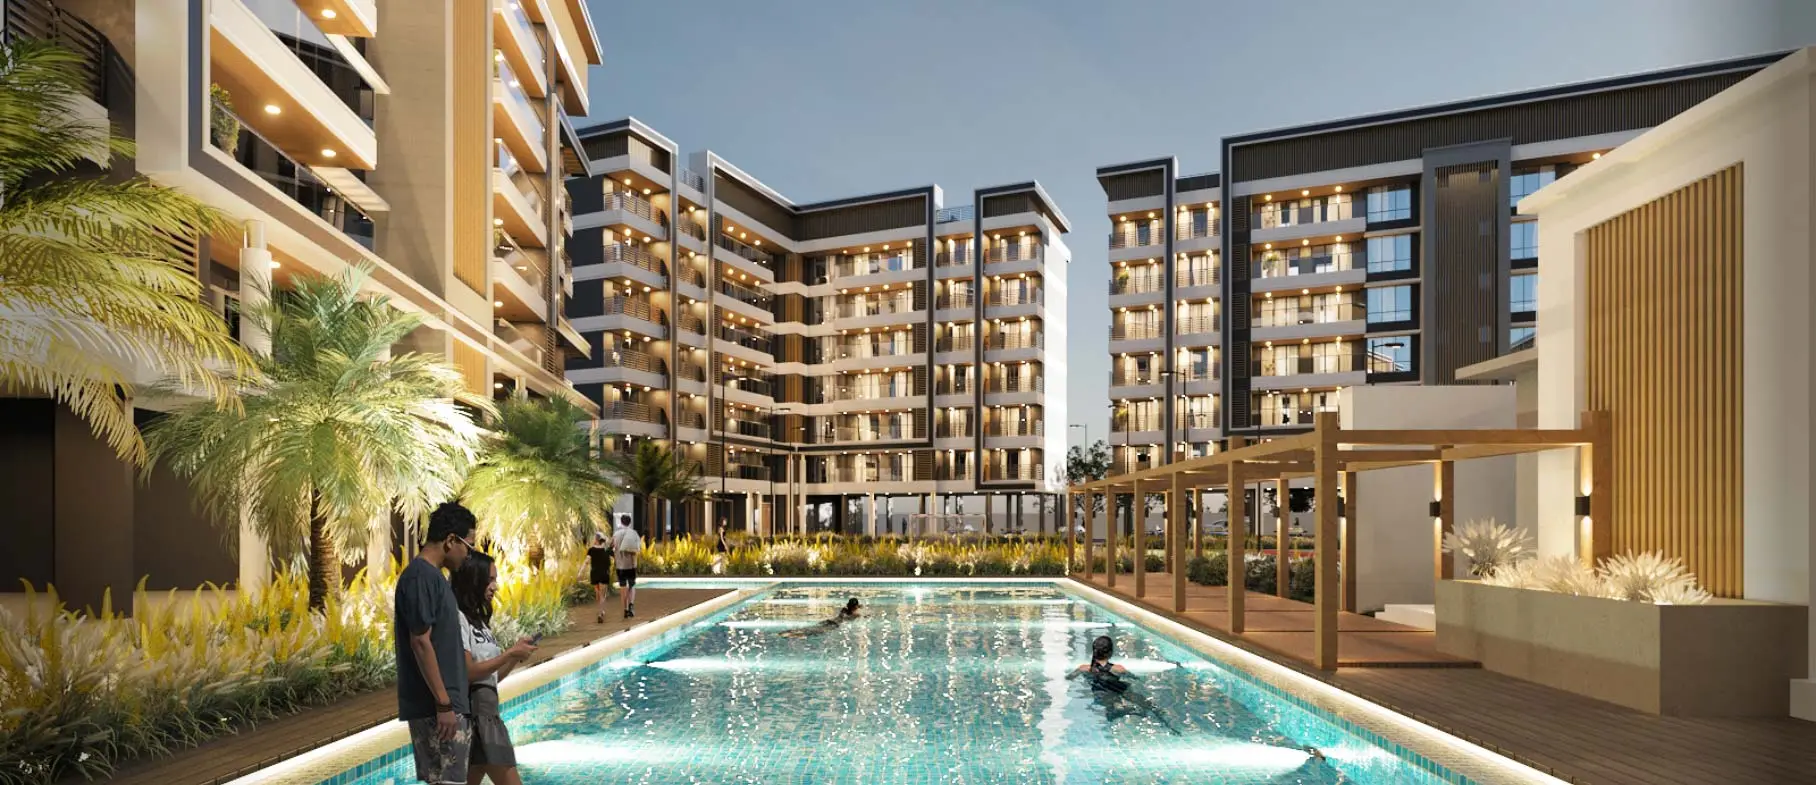 A pool surrounded by a large apartment building, Nyati Elite, offering 3 & 4.5 BHK premium flats